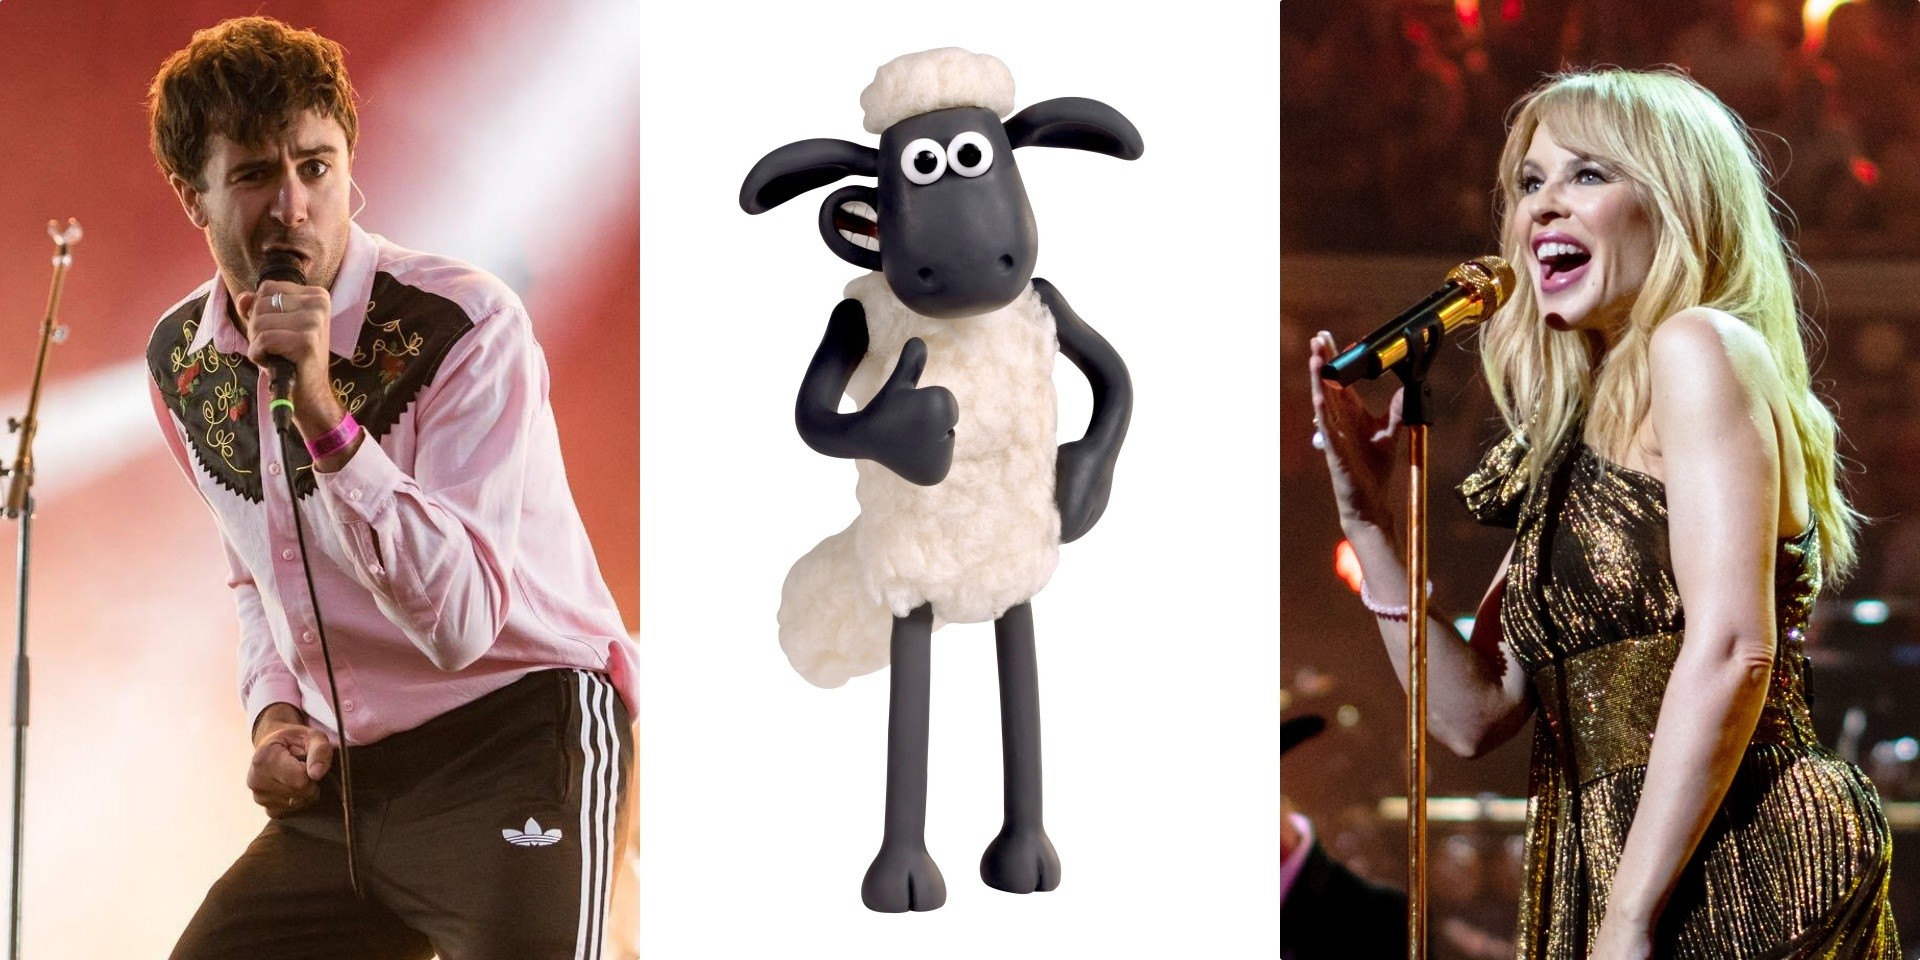 Kylie Minogue and The Vaccines team up for new song, ‘Lazy’ for upcoming Shaun the Sheep movie